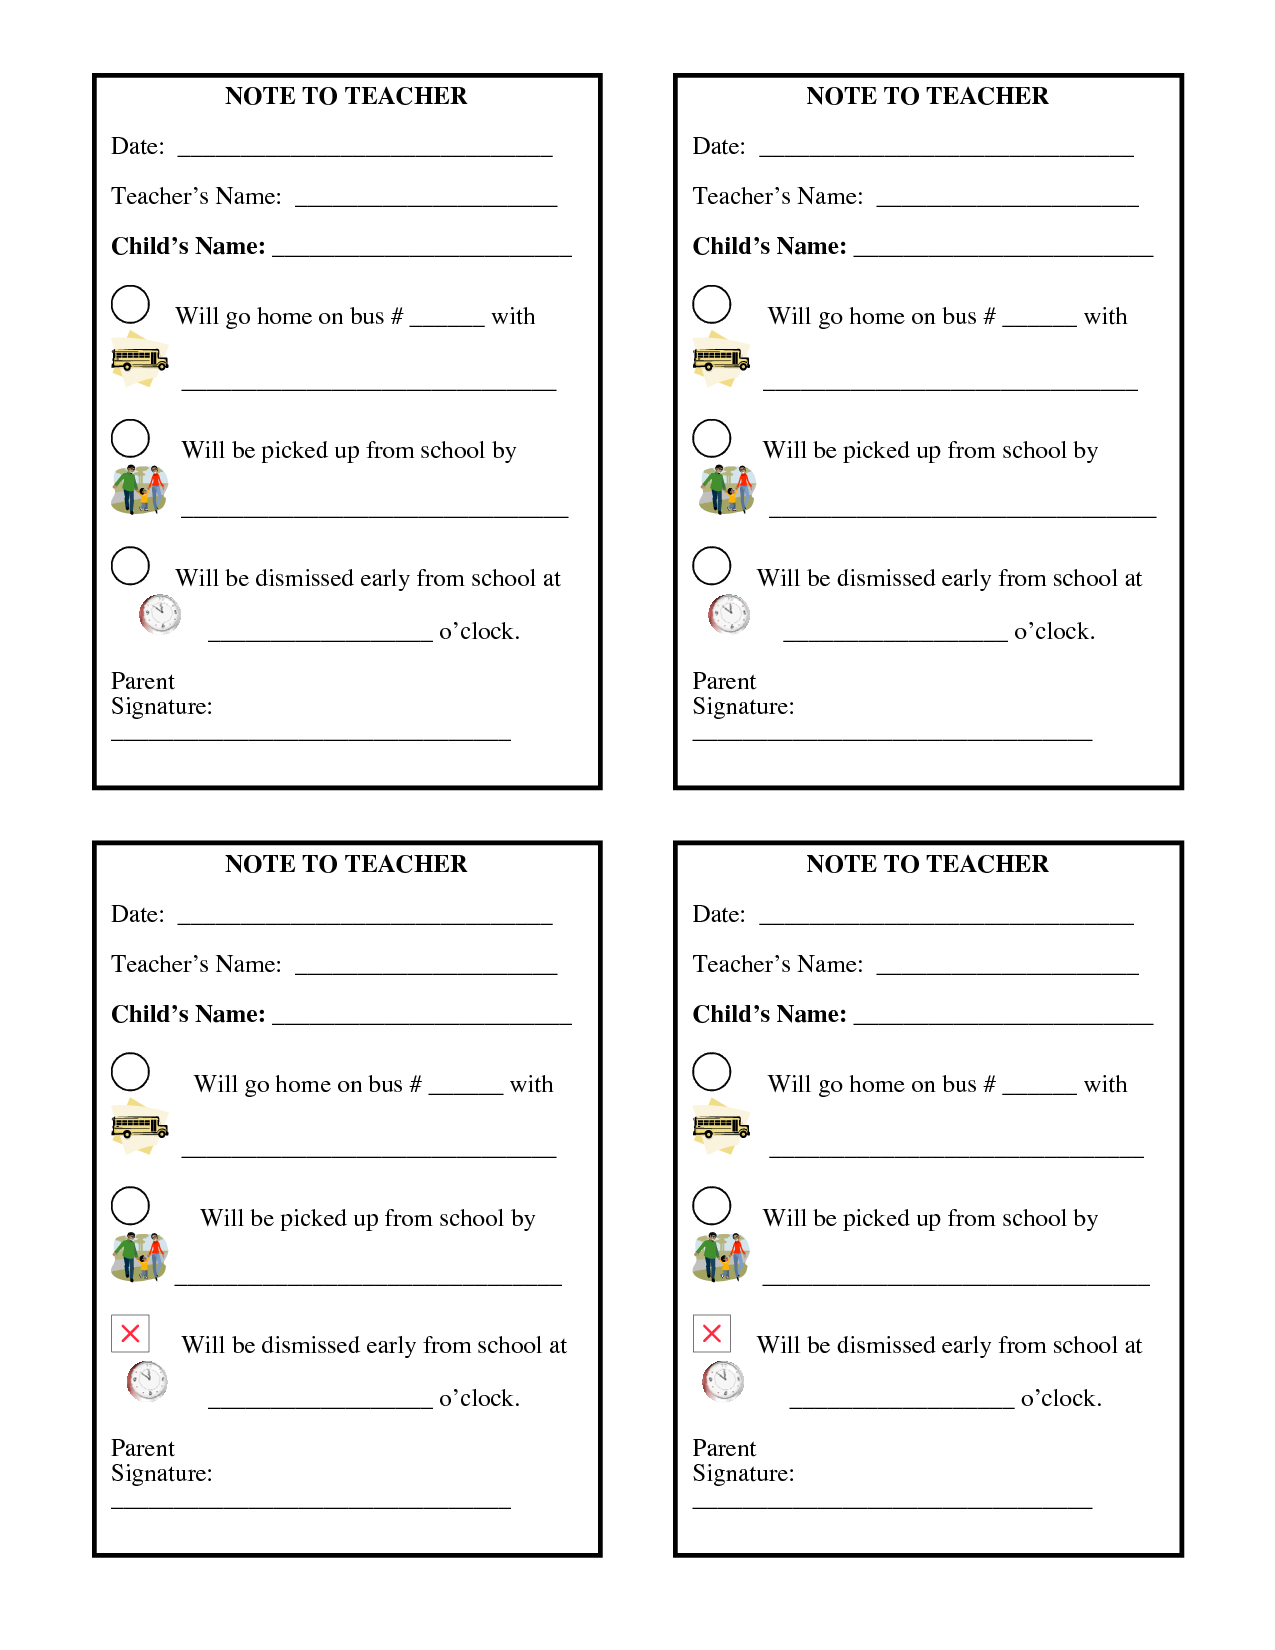 free-printable-pre-k-assessment-forms-printable-forms-free-online